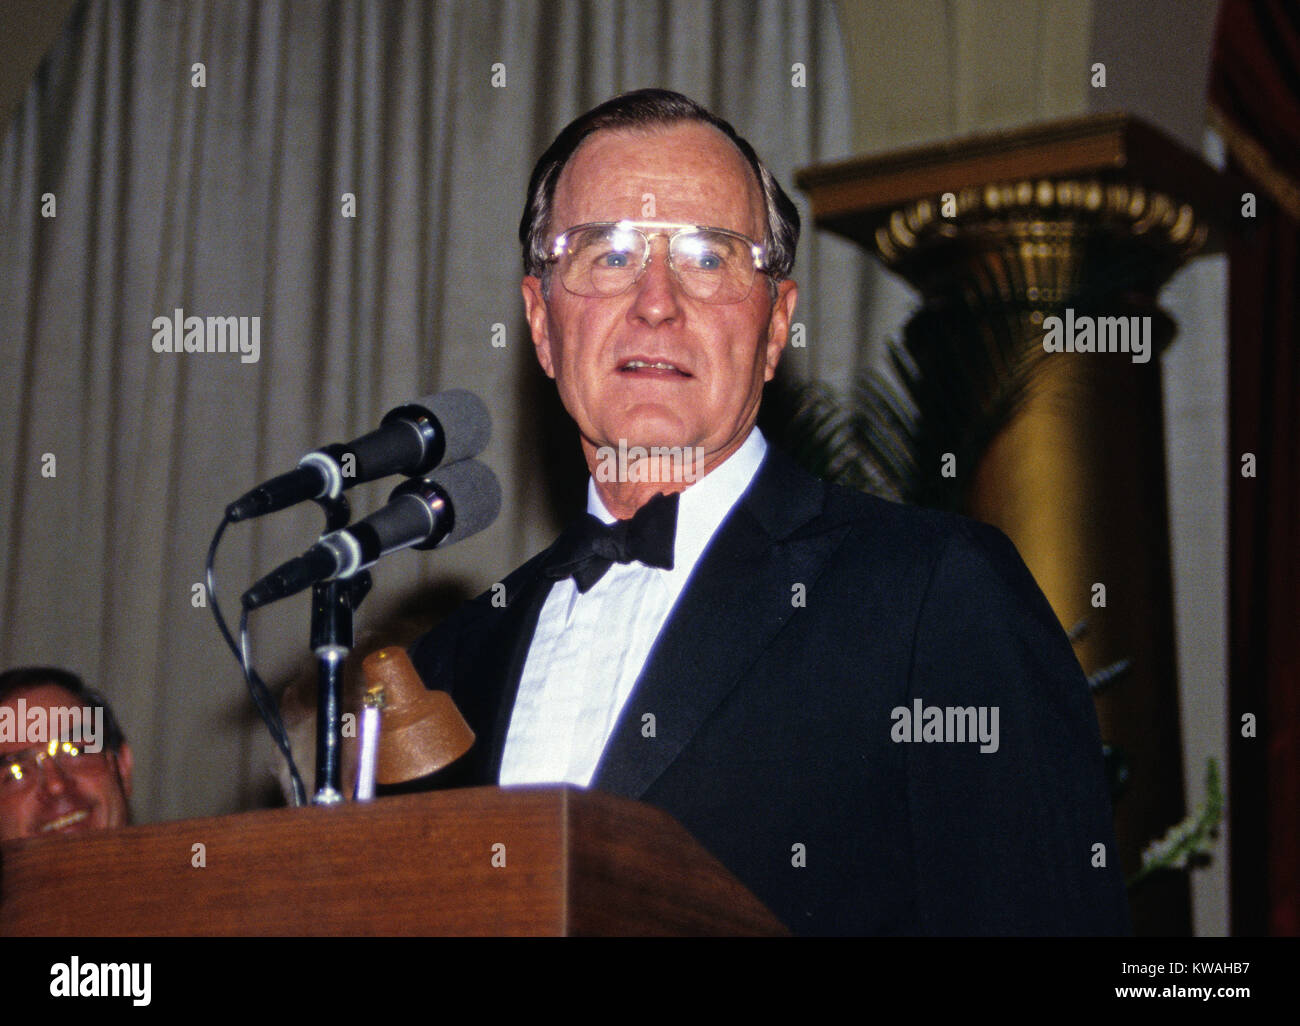 Washington, District of Columbia, USA. 18th Jan, 1989. United States President-elect George H.W. Bush makes remarks at a dinner at the Pension Building in Washington, DC on January 18 1989. Credit: Ron Sachs/CNP Credit: Ron Sachs/CNP/ZUMA Wire/Alamy Live News Stock Photo